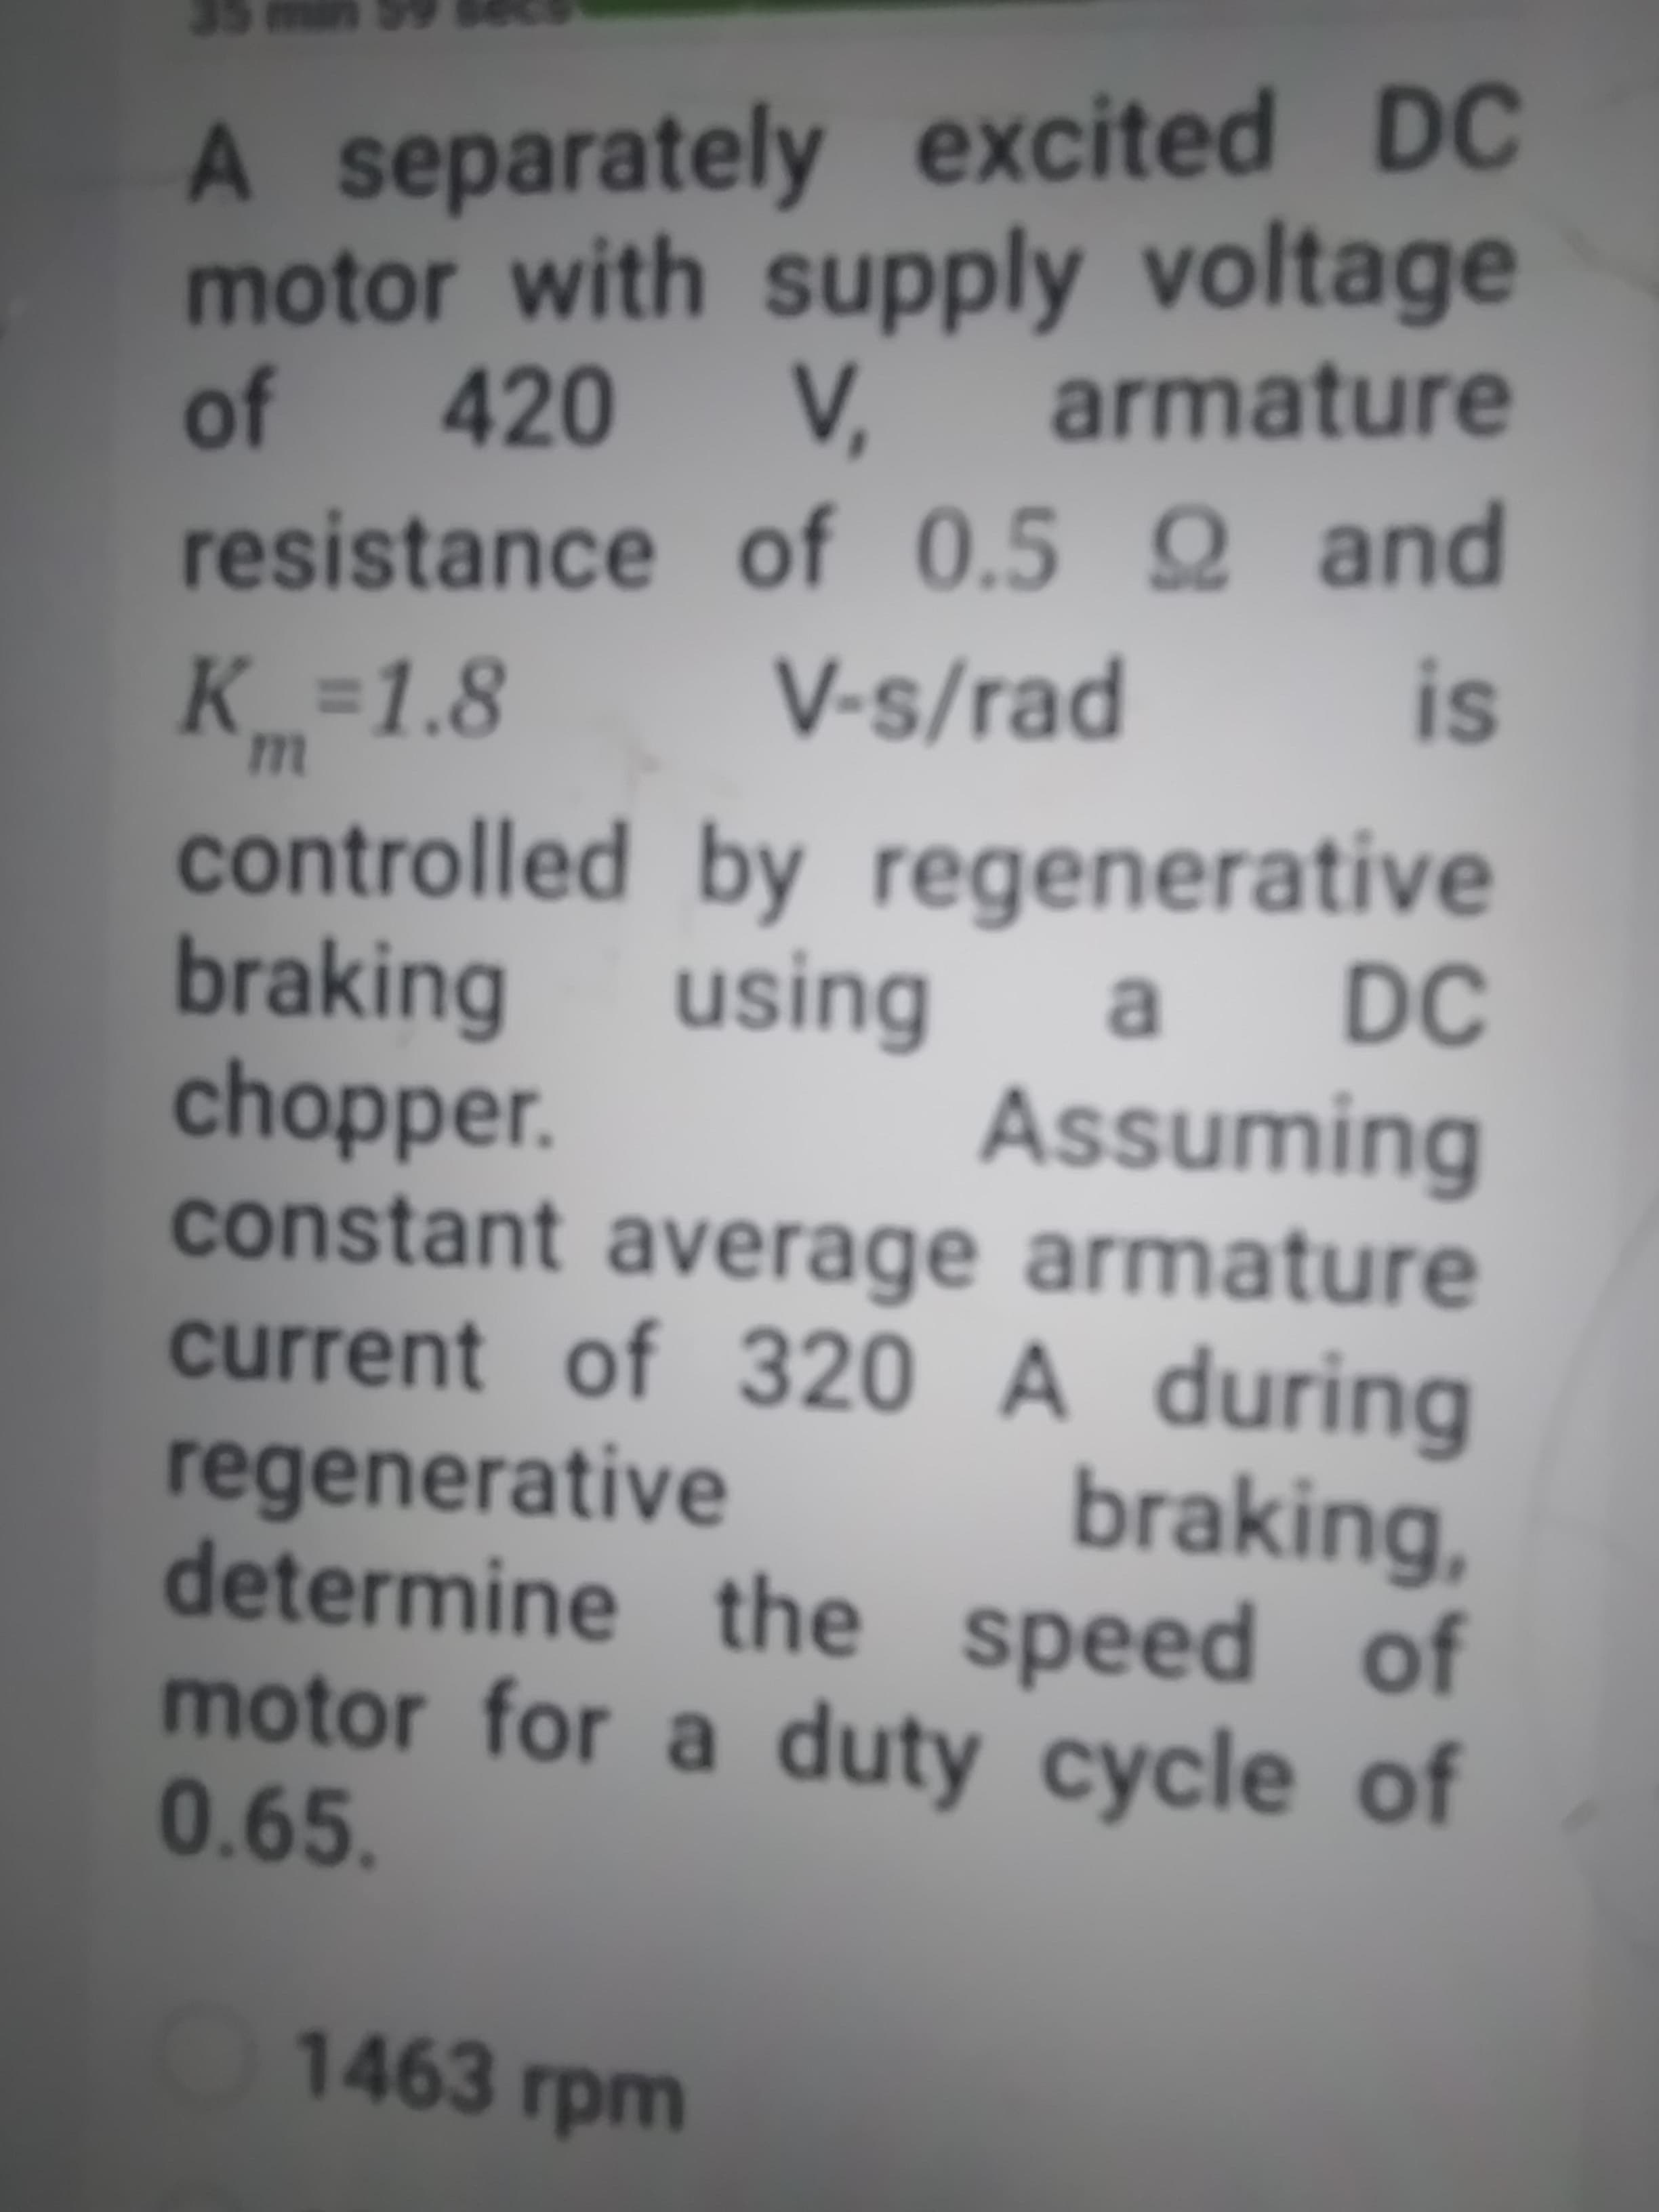 A separately excited DC
motor with supply voltage
420
of
armature
resistance of 0.5 Q and
V-s/rad
%3D
K_%=1.8
controlled by regenerative
braking
chopper.
constant average armature
current of 320 A during
DC
regenerative
determine the speed of
motor for a duty cycle of
0.65.
braking,
1463 rpm
